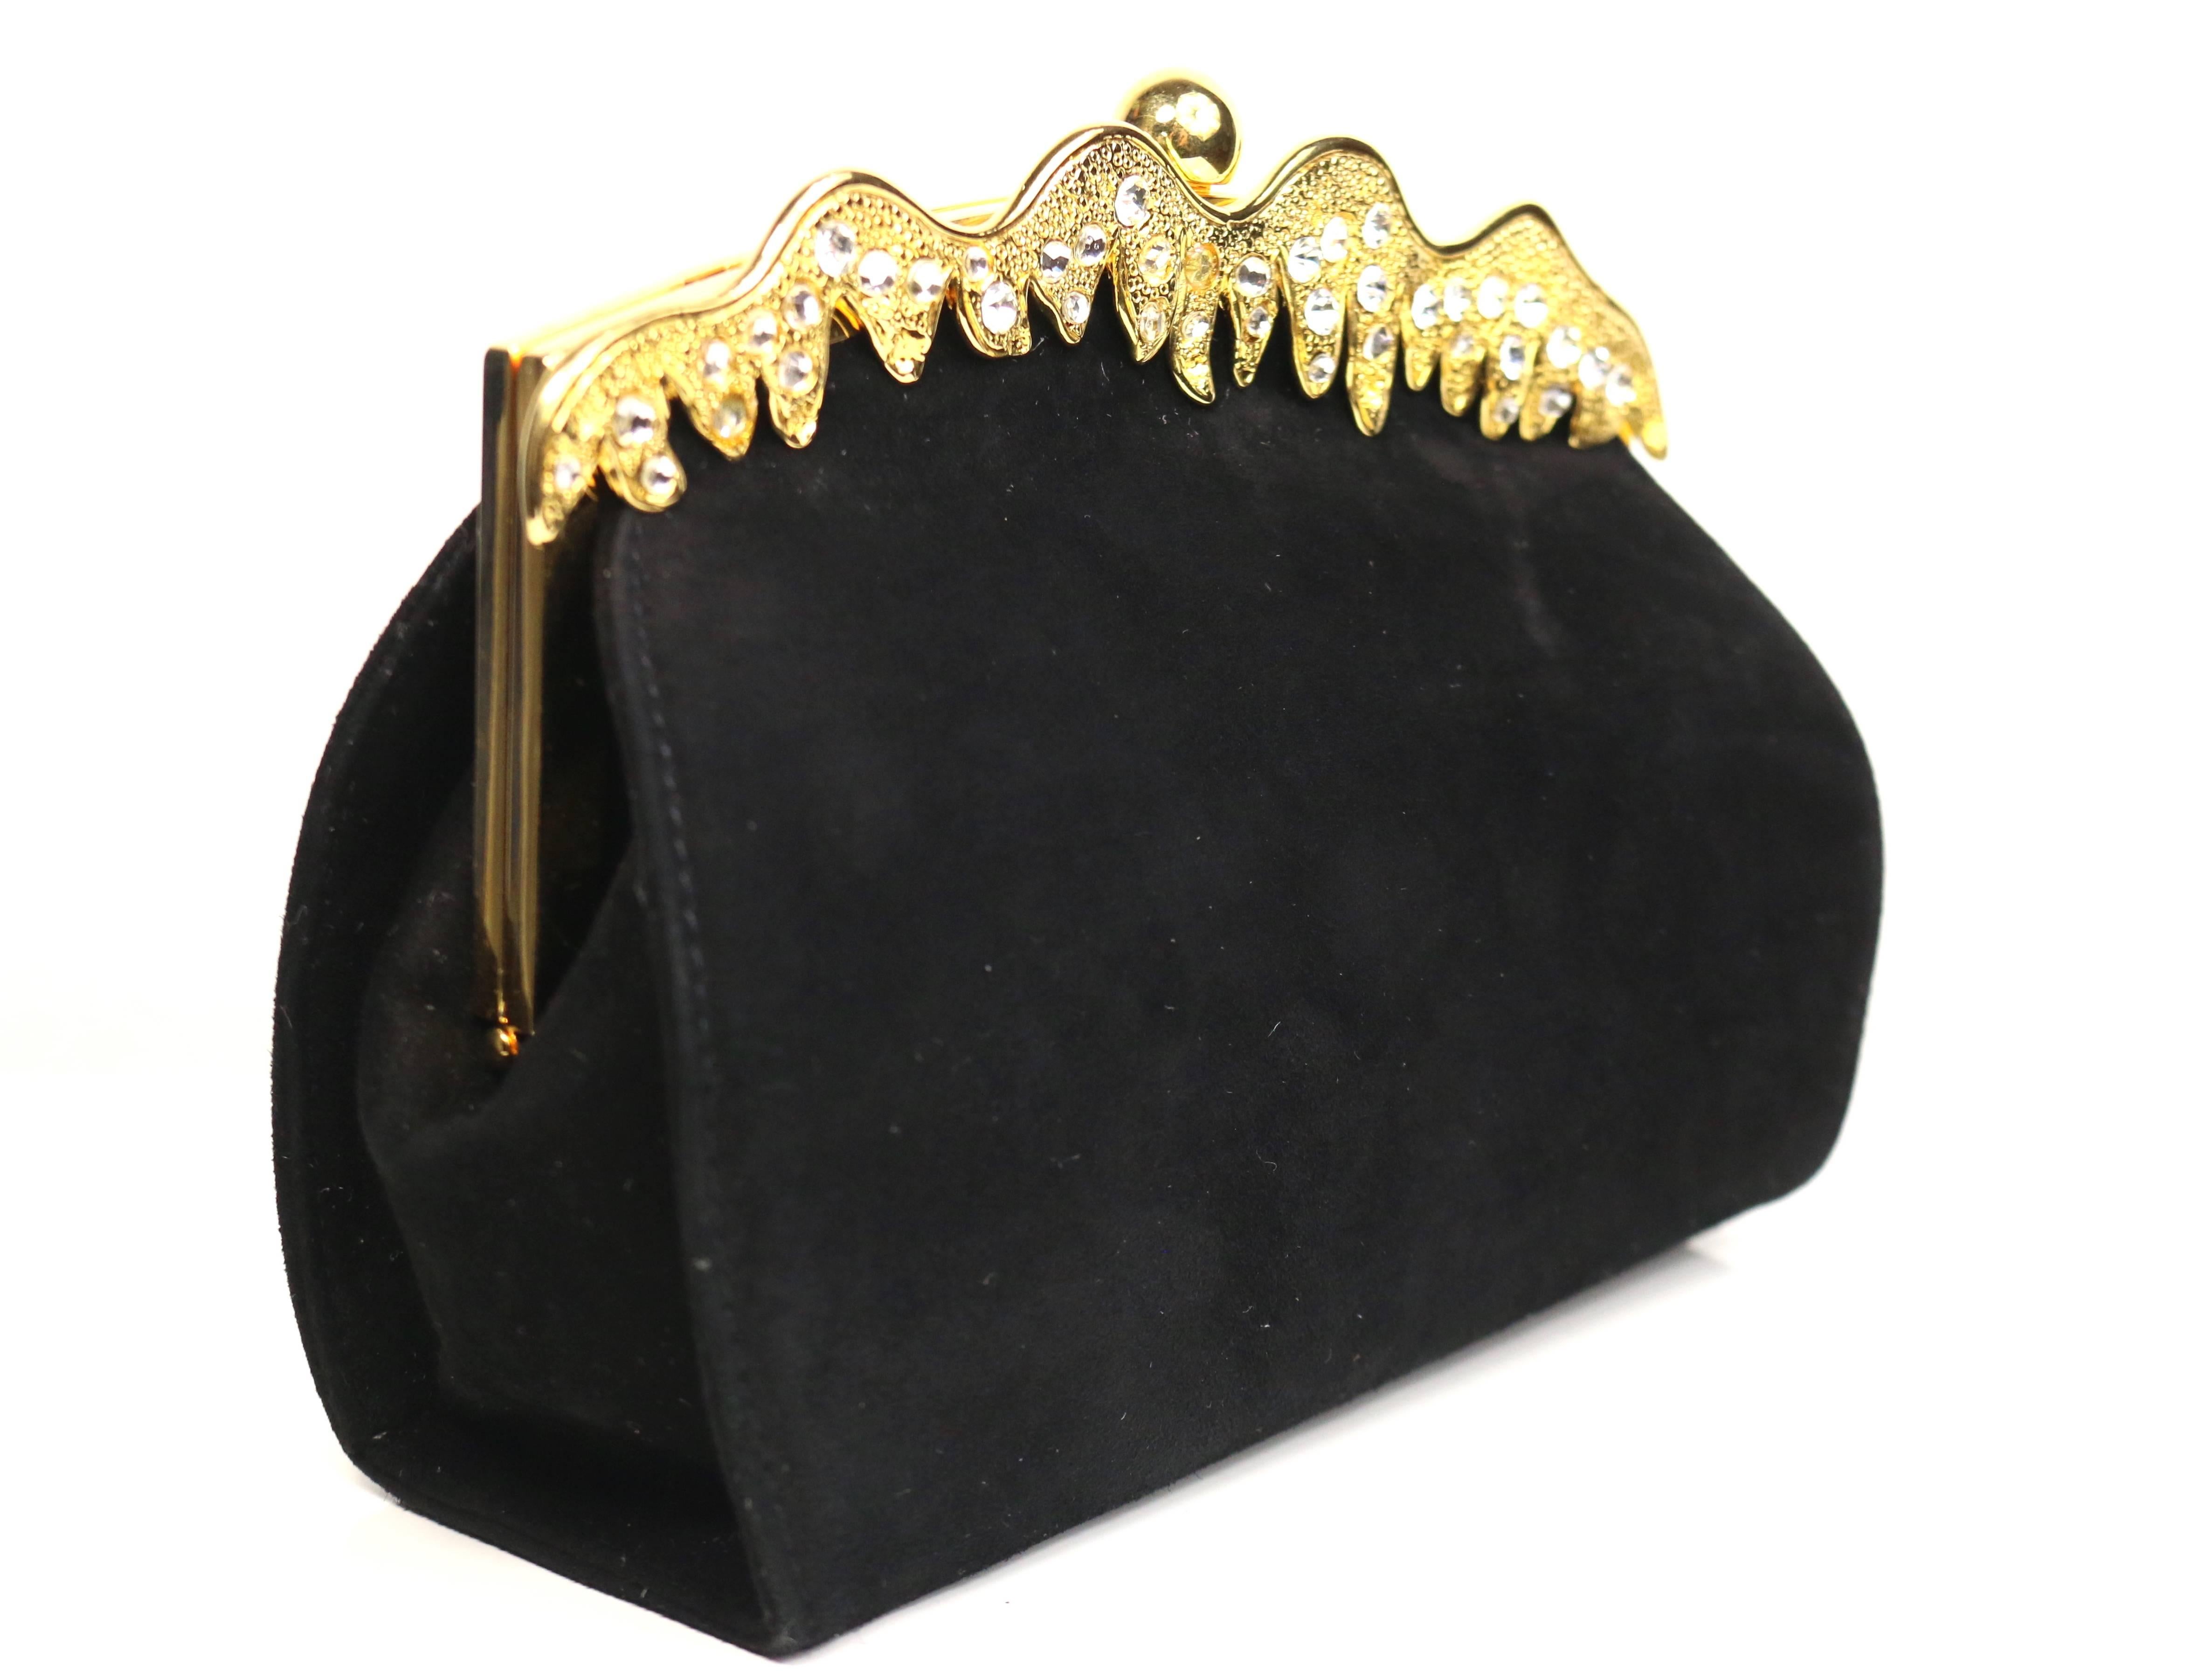 - Vintage 80s Rodo black suede evening clutch/shoulder bag. 

- Featuring a gold toned irregular shape with crystal rhinestones. 

- Gold toned round shape kiss lock closure. 

- Detachable black leather shoulder strap. 

- Length: 6.5 inches.